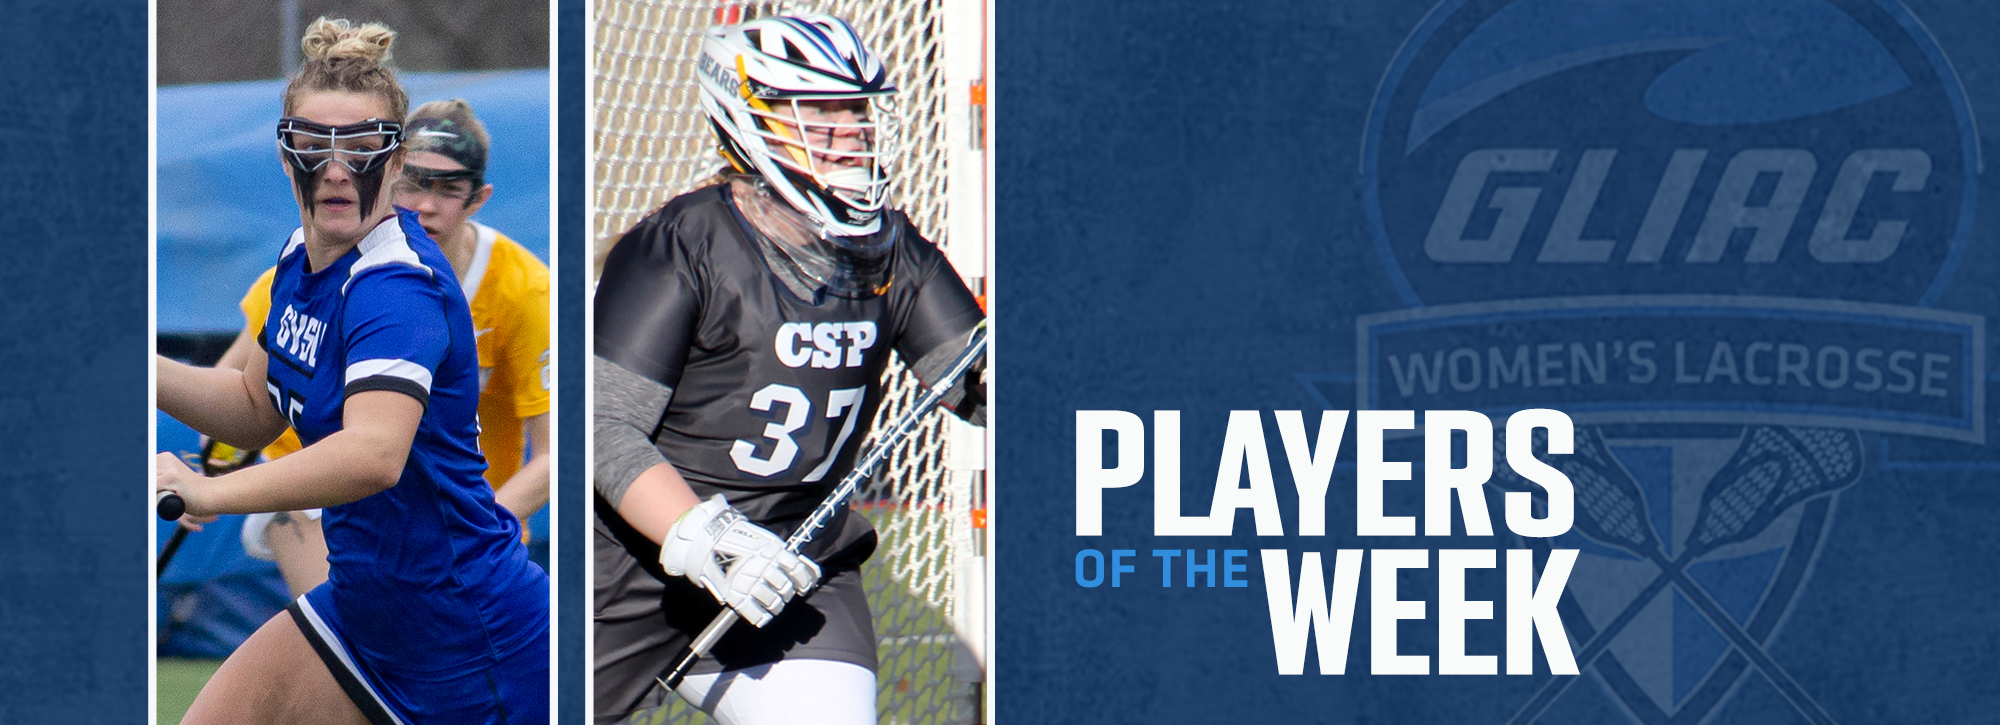 GVSU's Champagne and CSP's McDole earn women's lacrosse weekly honors